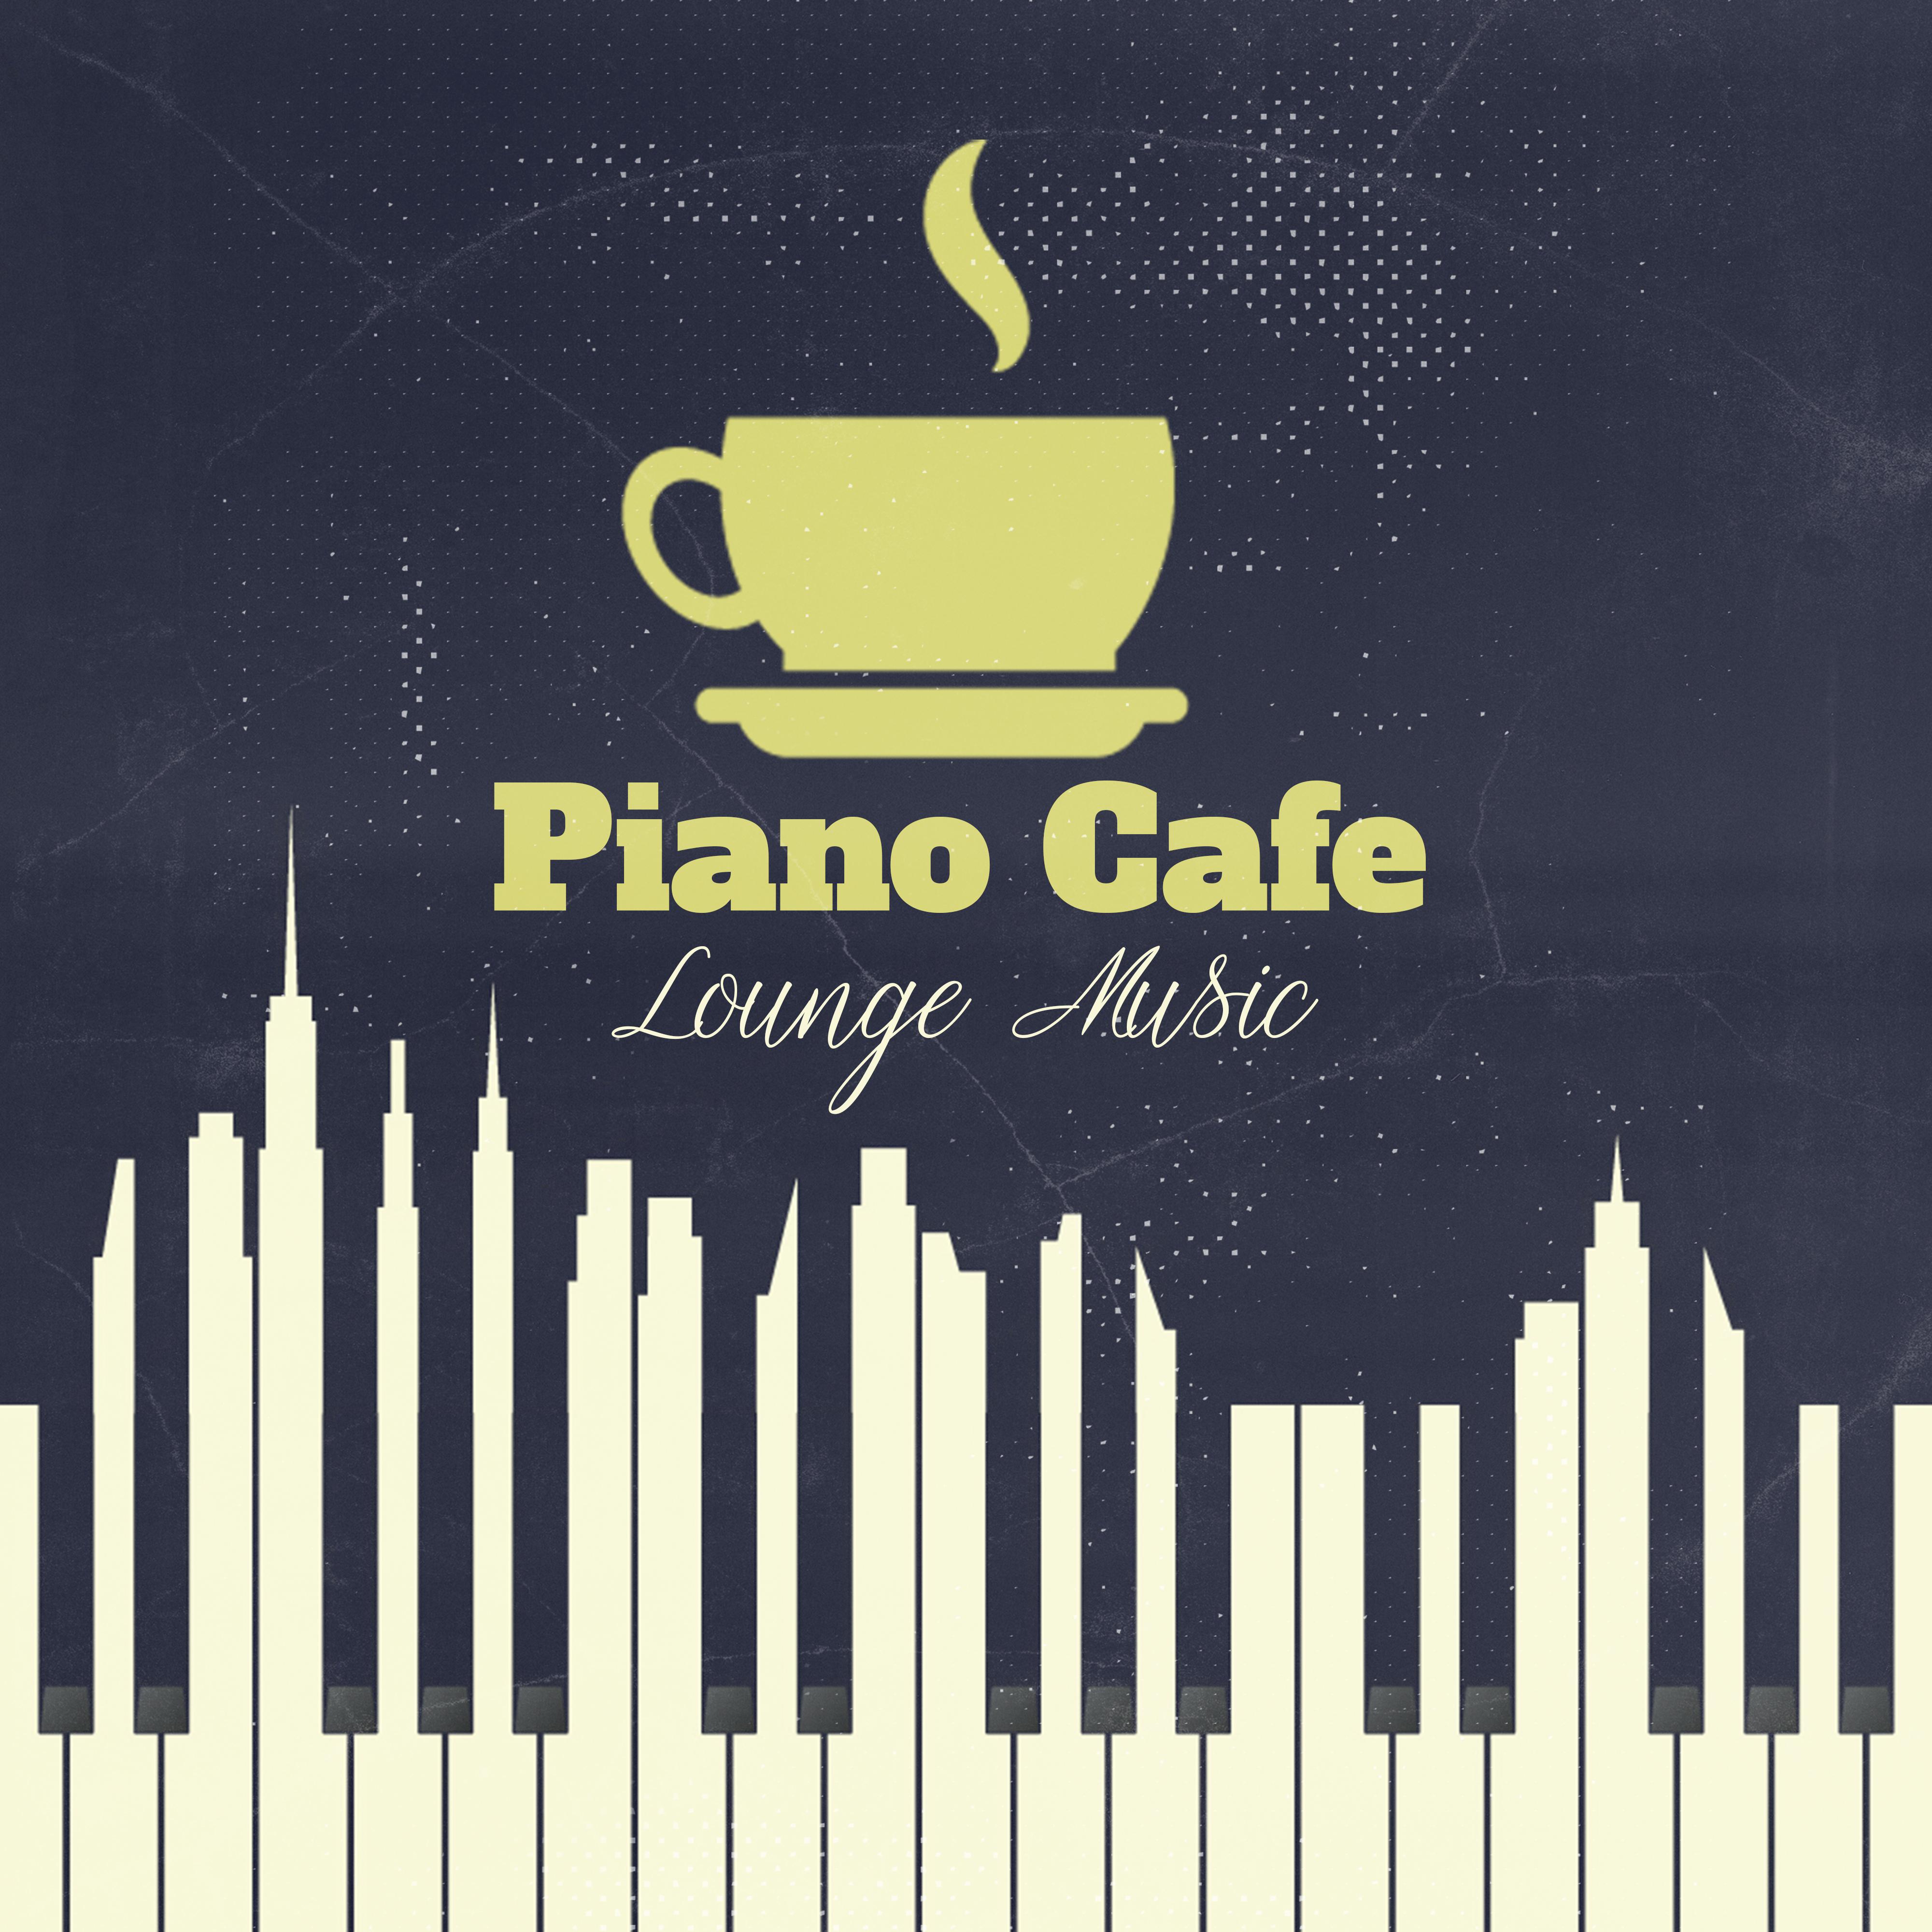 Piano Cafe Lounge Music: 2019 Instrumental Music Perfect for Coffee & Breakfast, Positive Feelings in the Morning, Smooth Soft Sounds of Piano for Good Mood & Increase Vital Energy